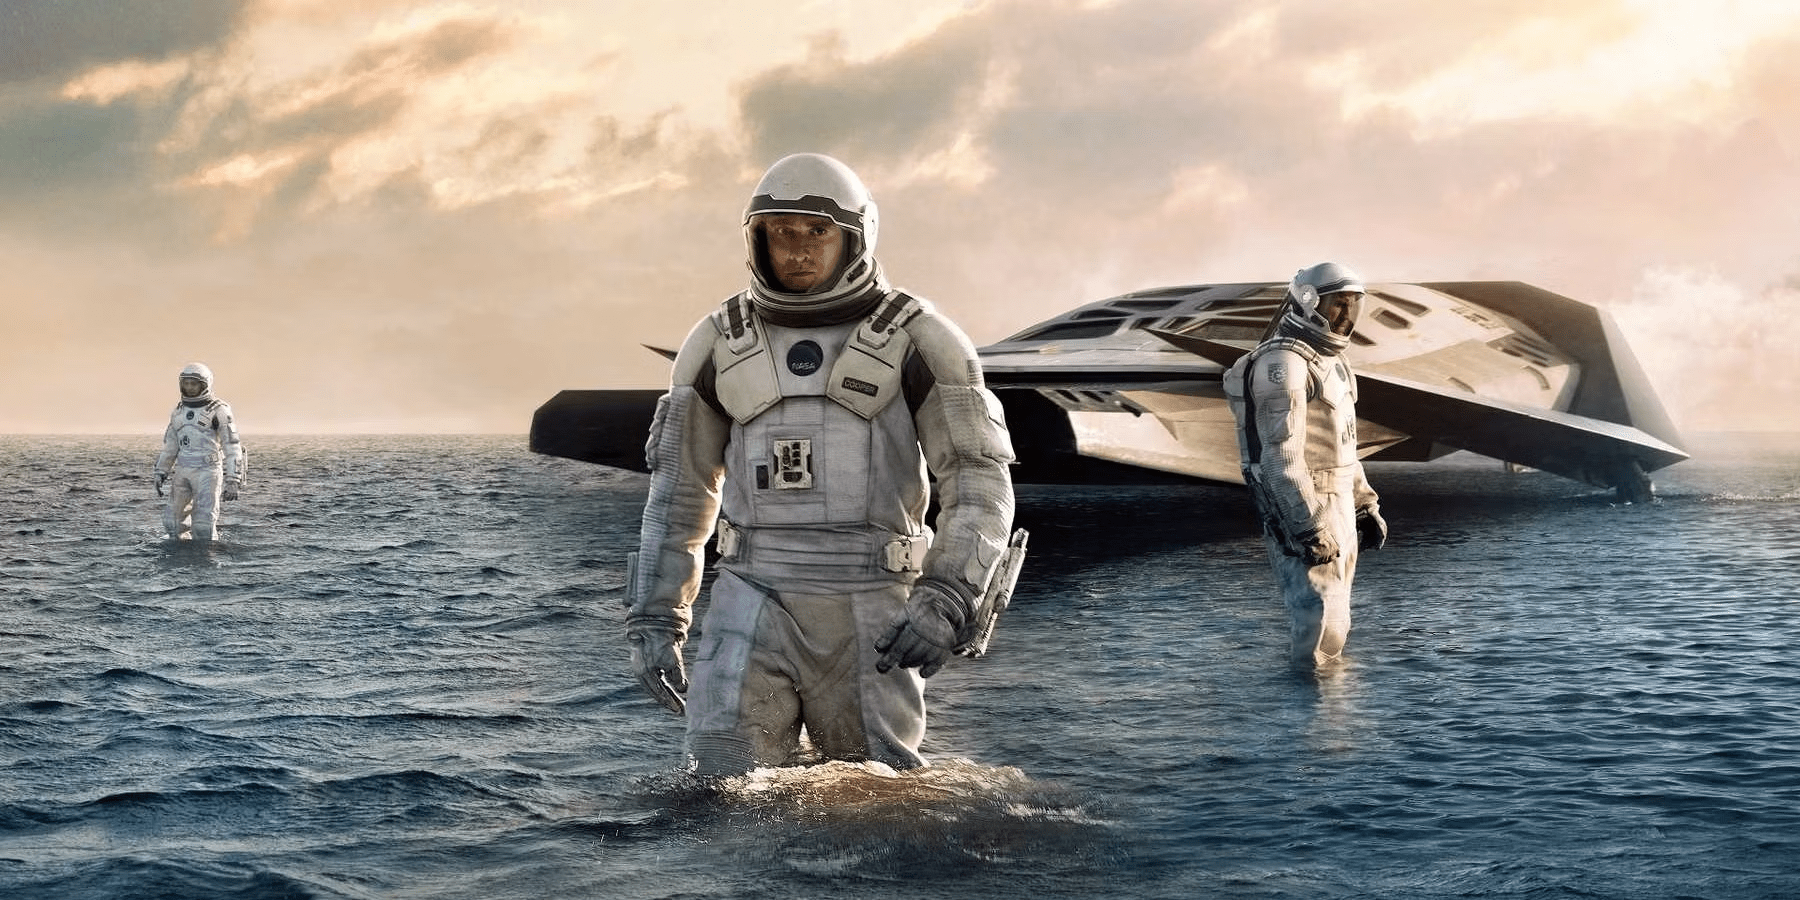 Will There Be an Interstellar 2 Movie?